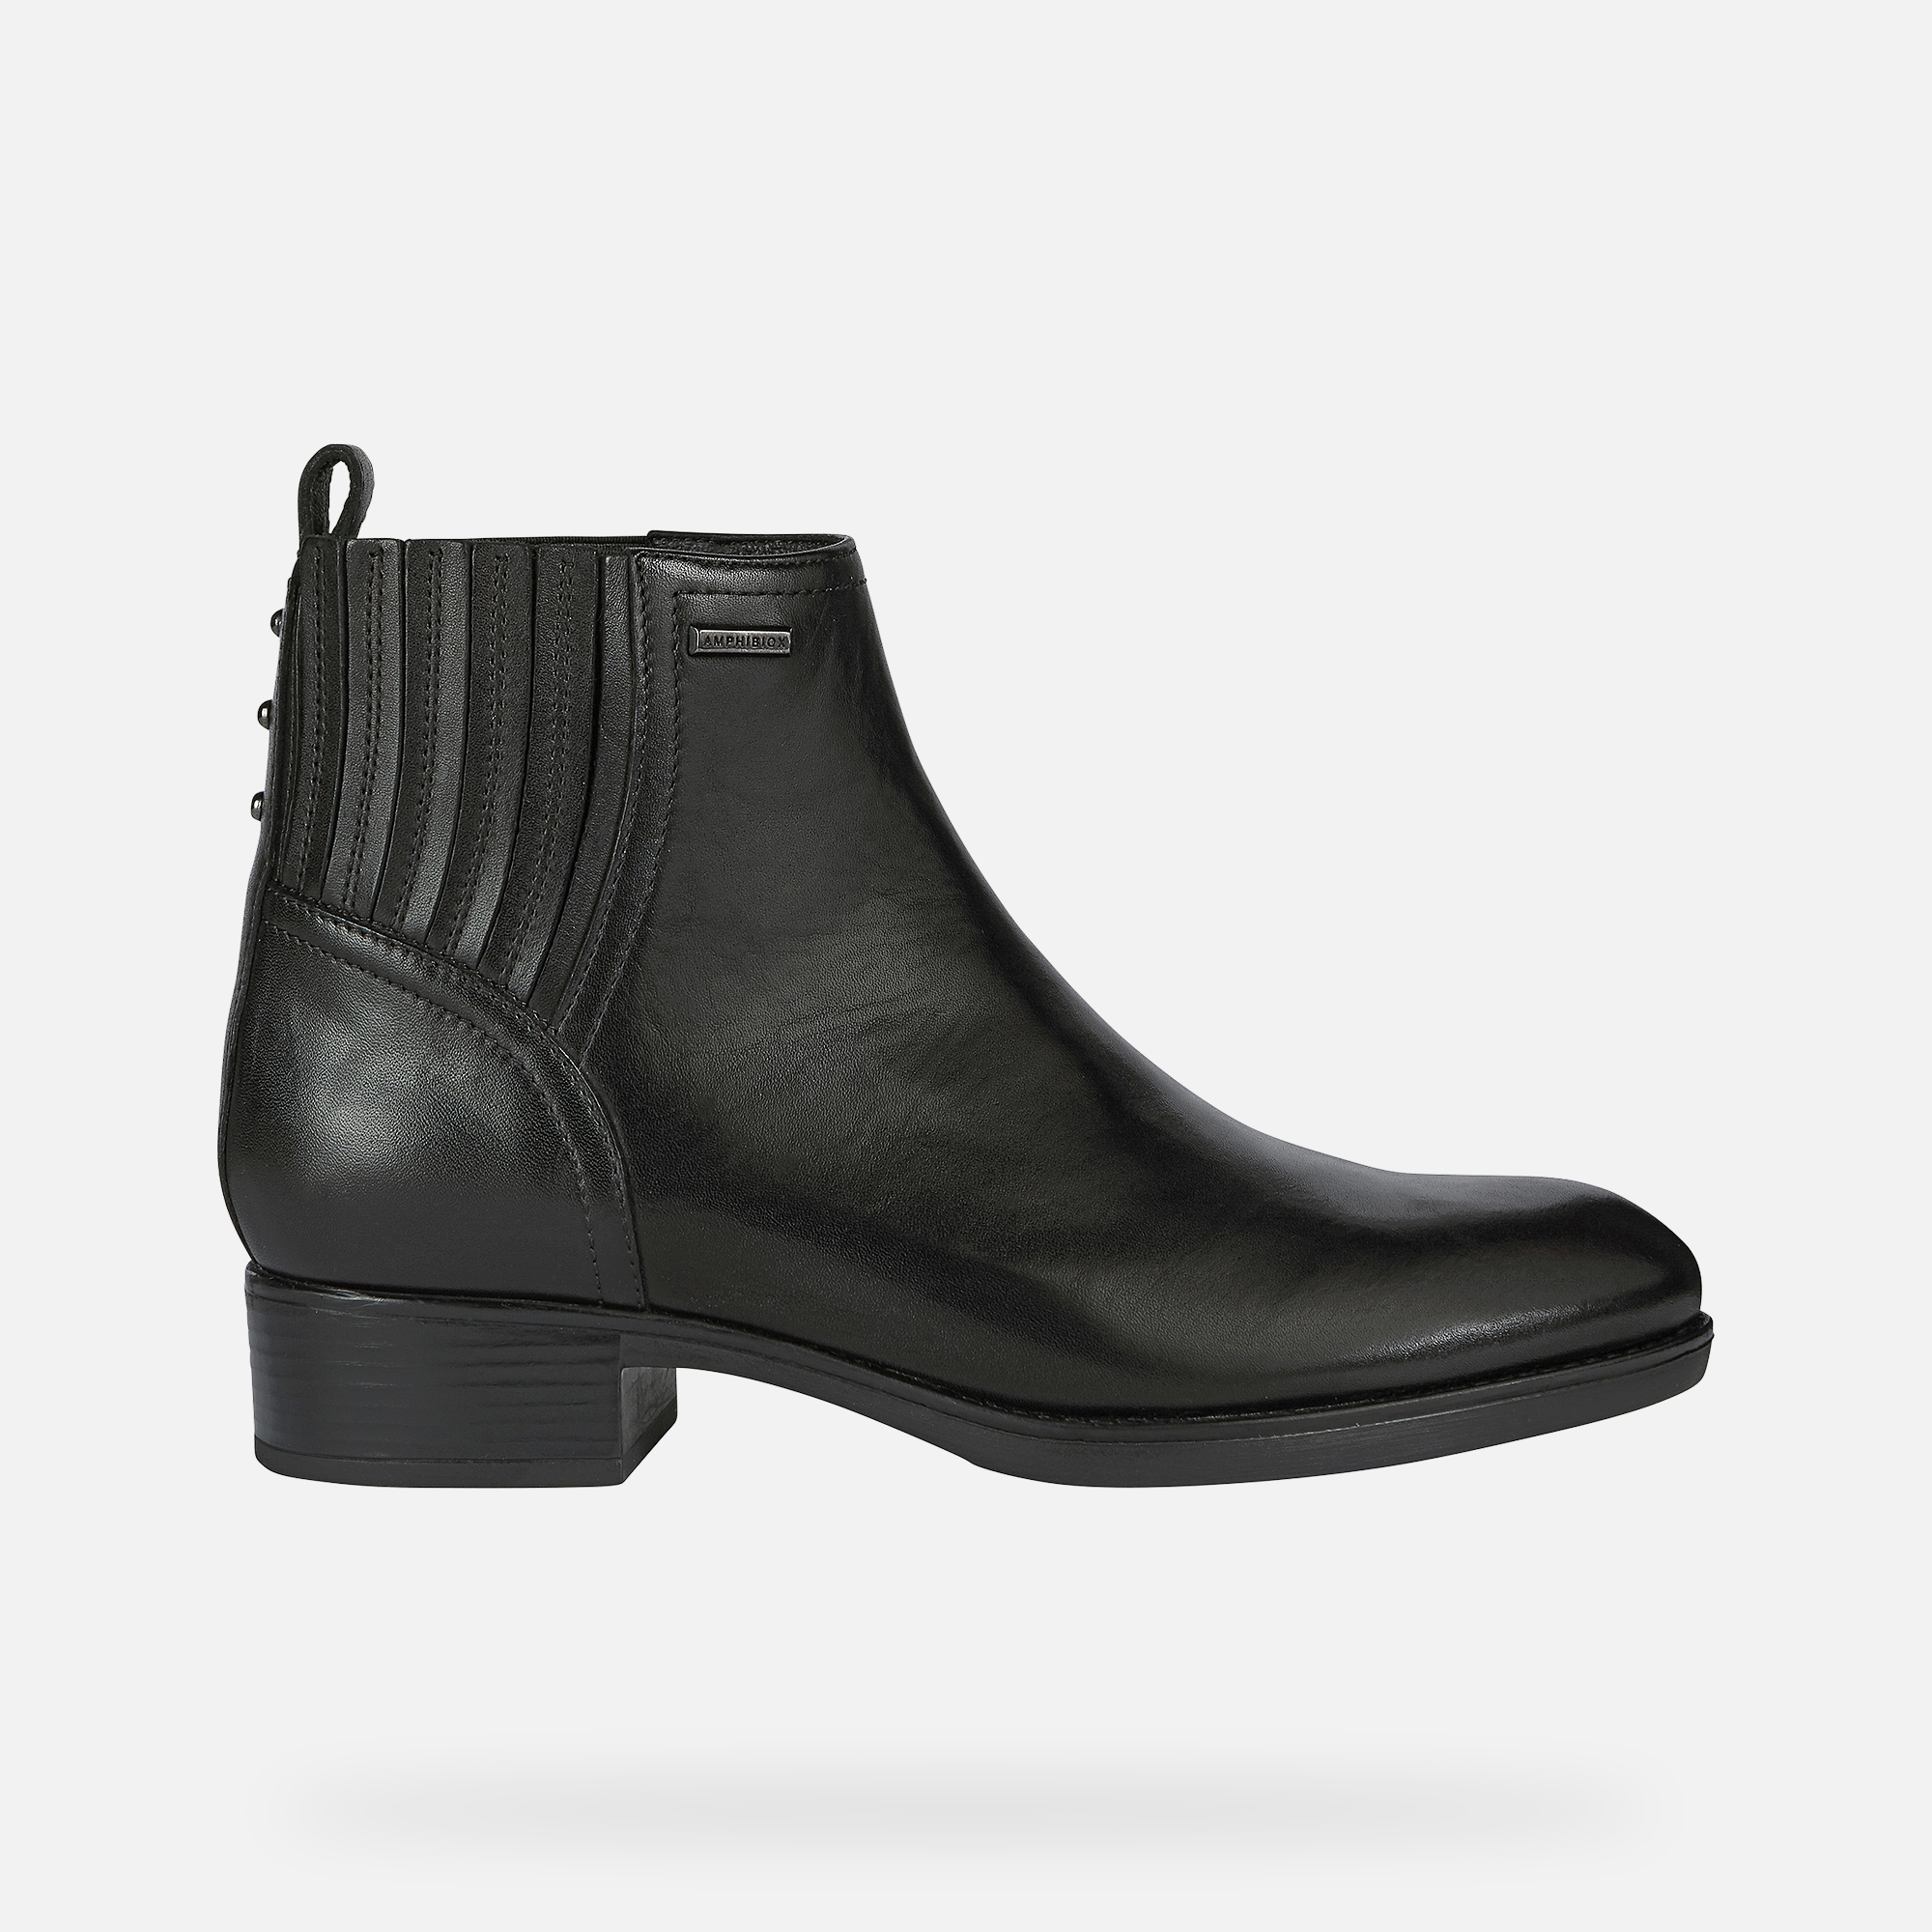 FELICITY NP ABX WOMAN - ANKLE BOOTS from women | Geox